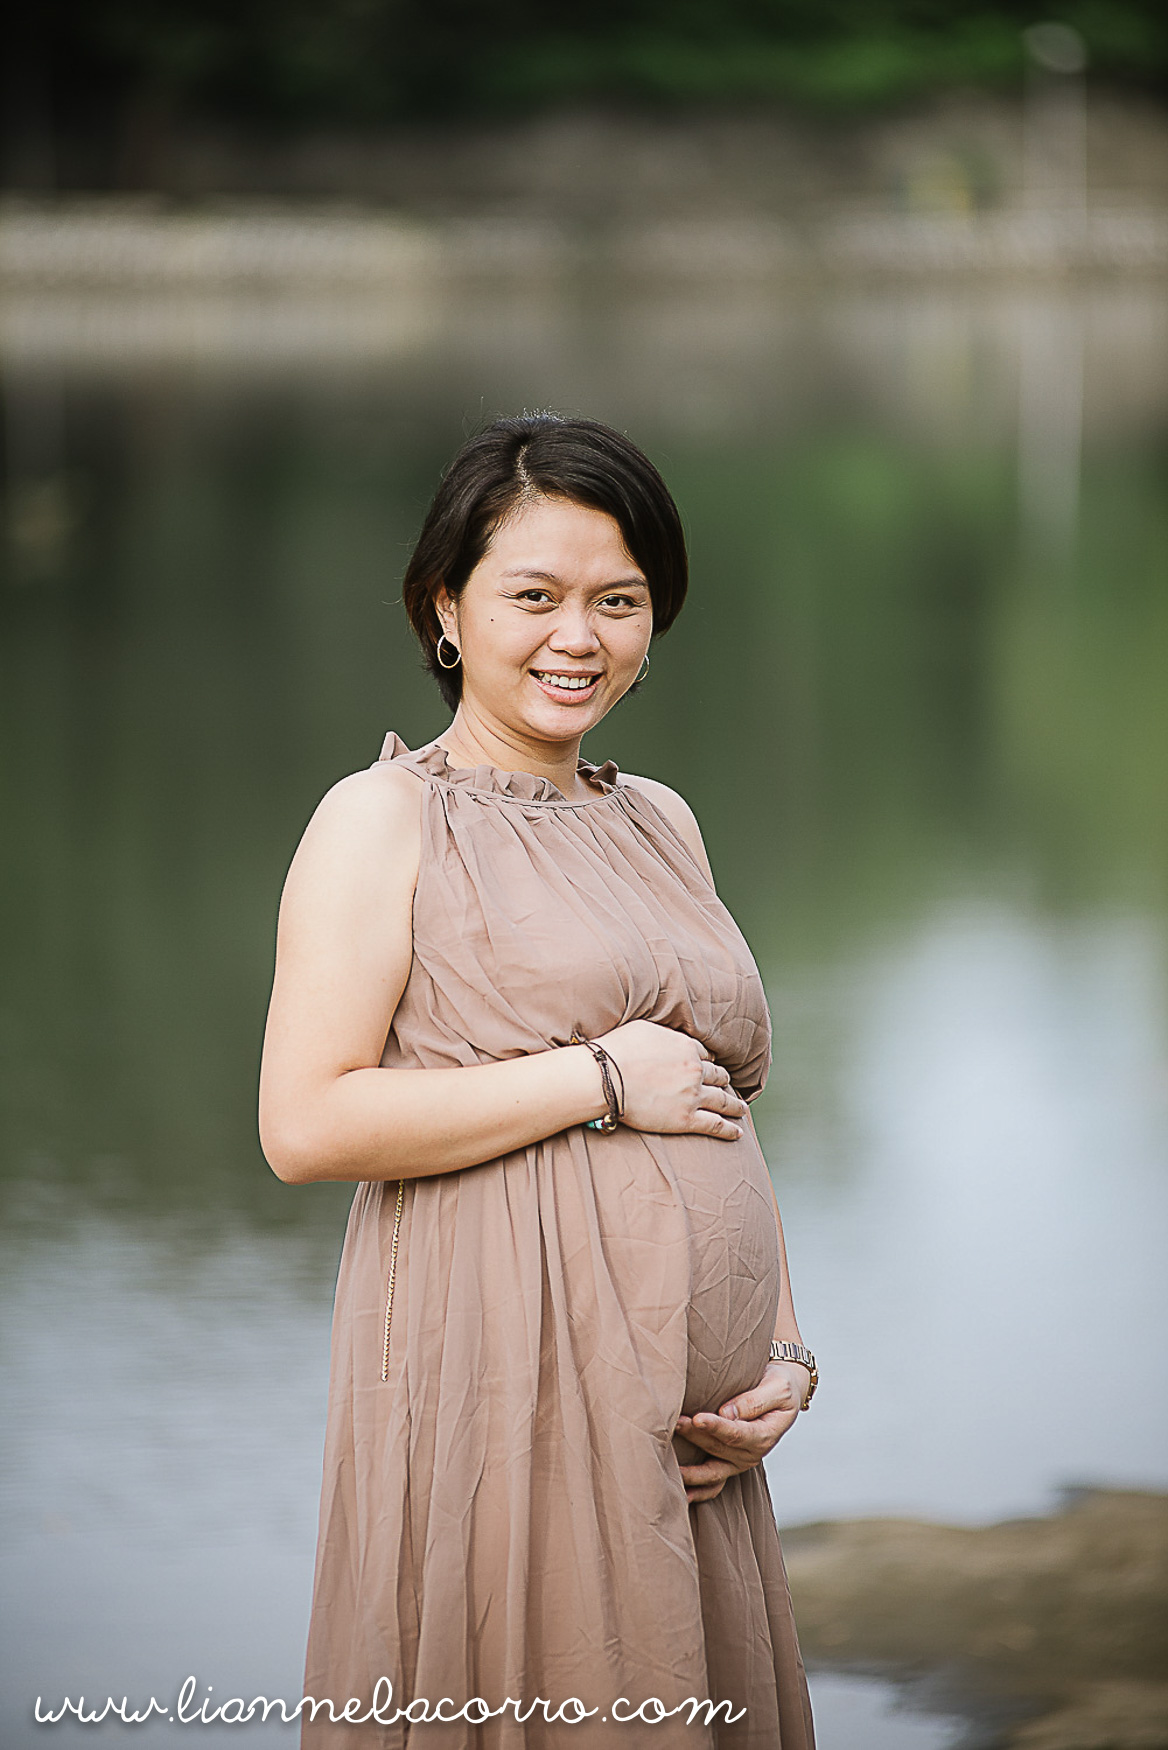 Lifestyle Maternity Family Photography by Lianne Bacorro-9